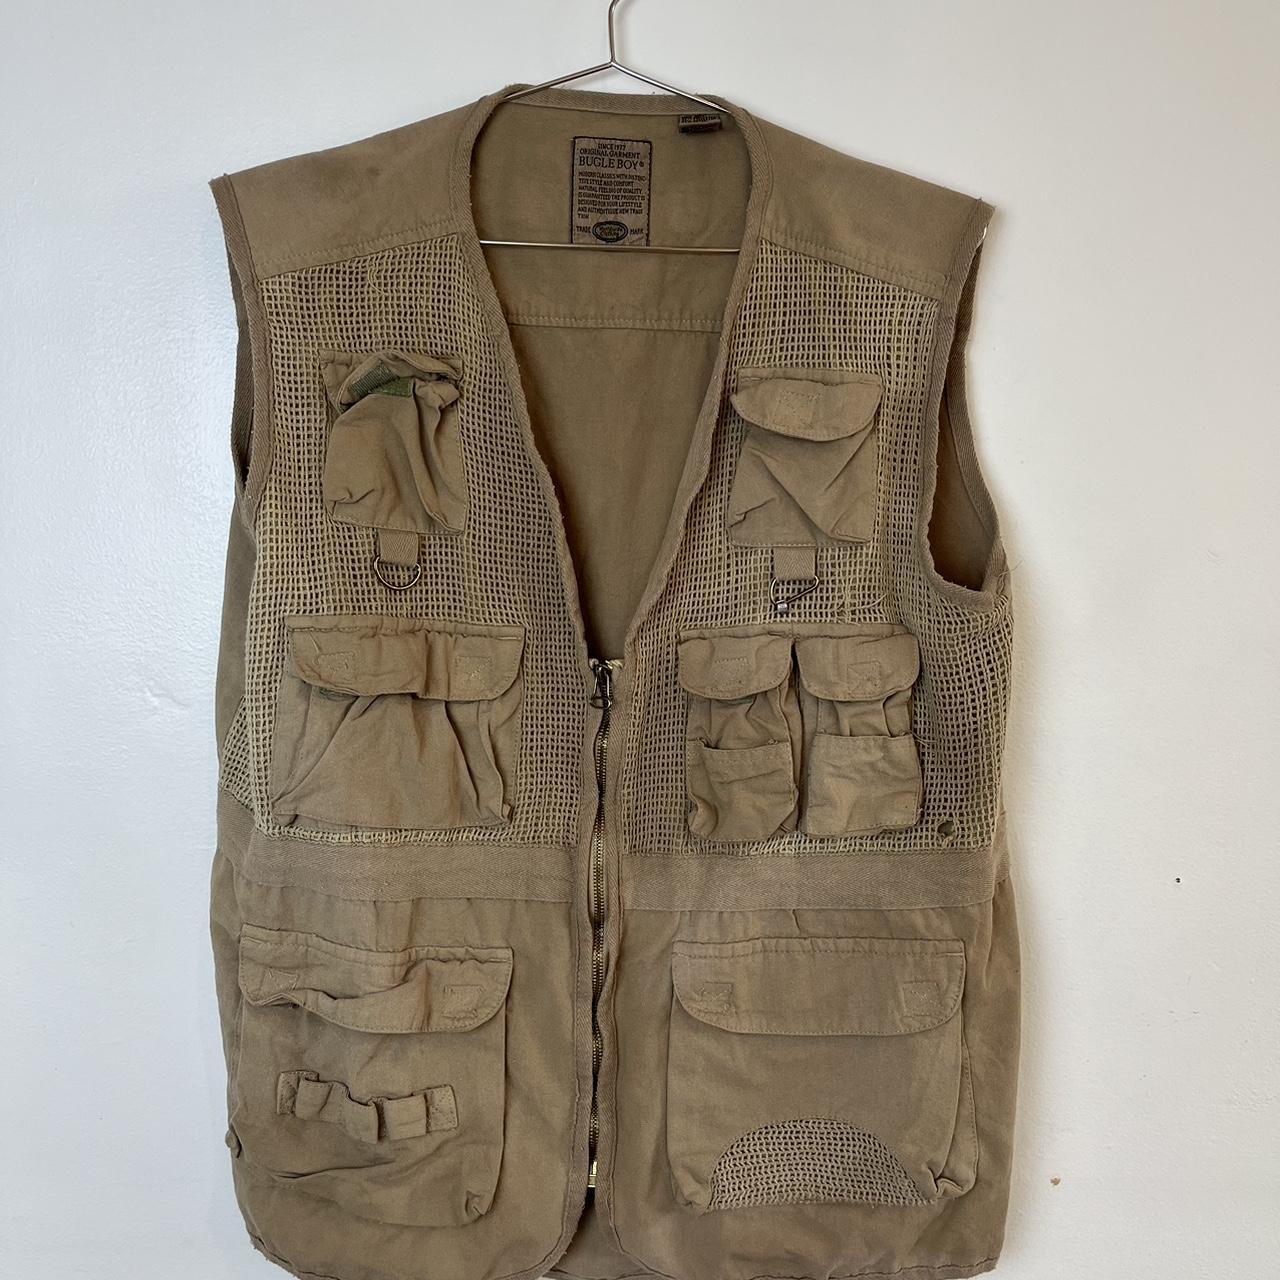 Vintage Fishing Vest, small hole but barely - Depop